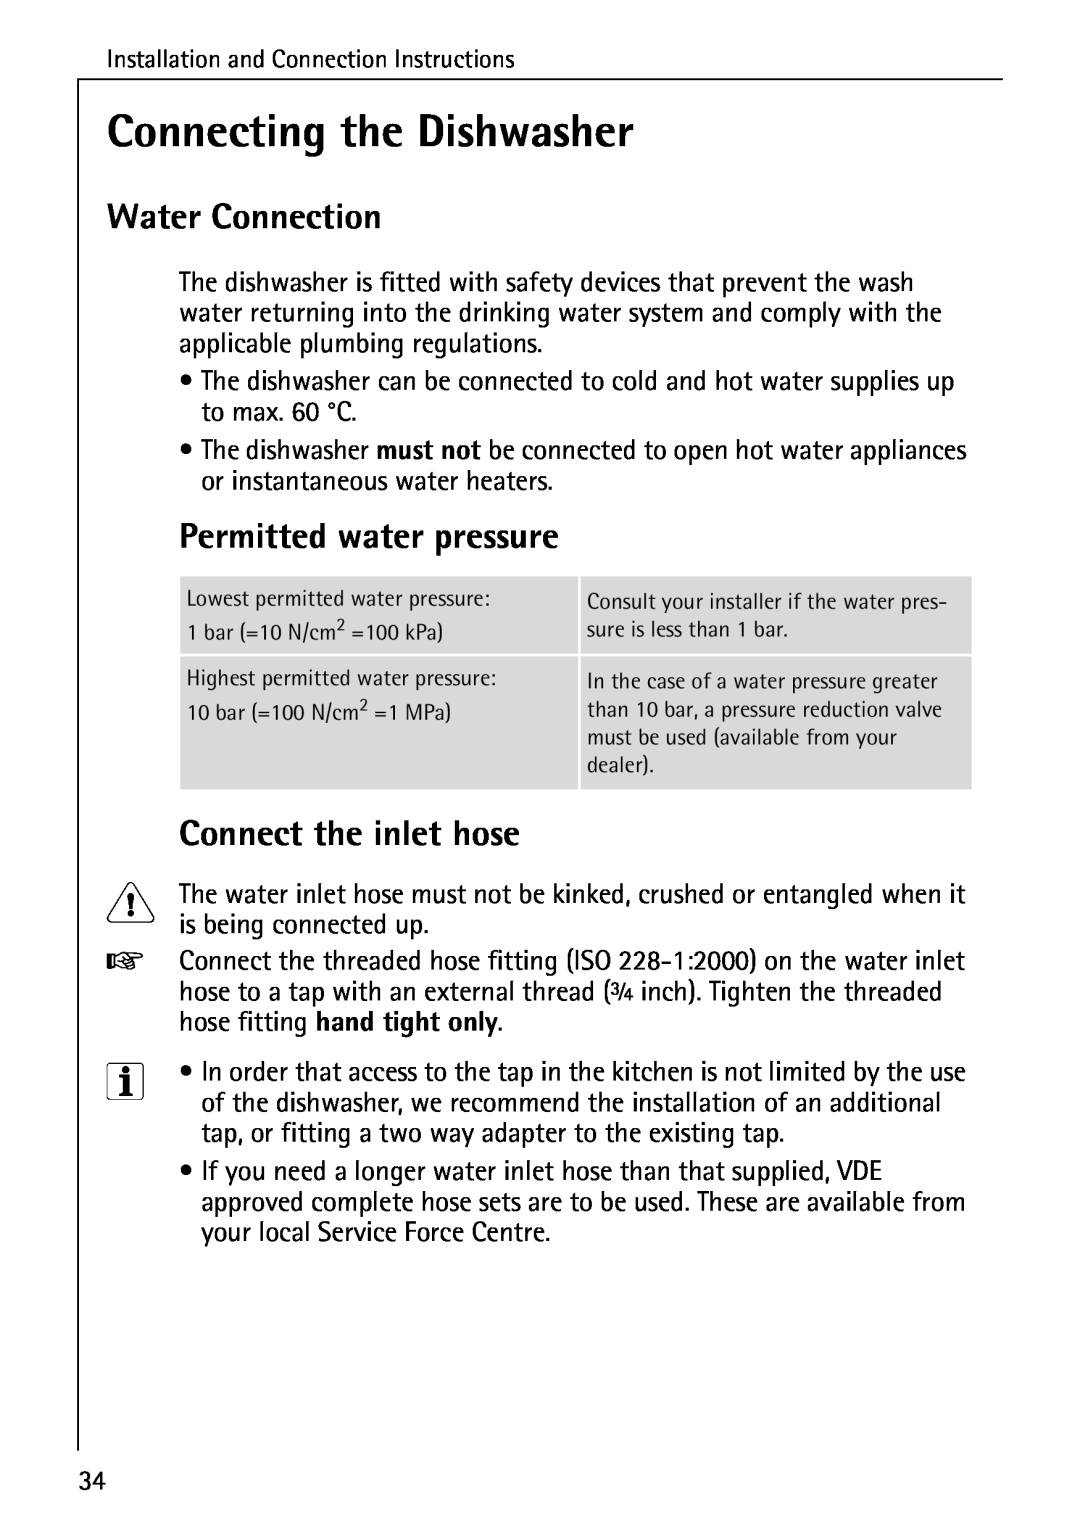 AEG 3A manual Connecting the Dishwasher, Water Connection, Permitted water pressure, Connect the inlet hose 